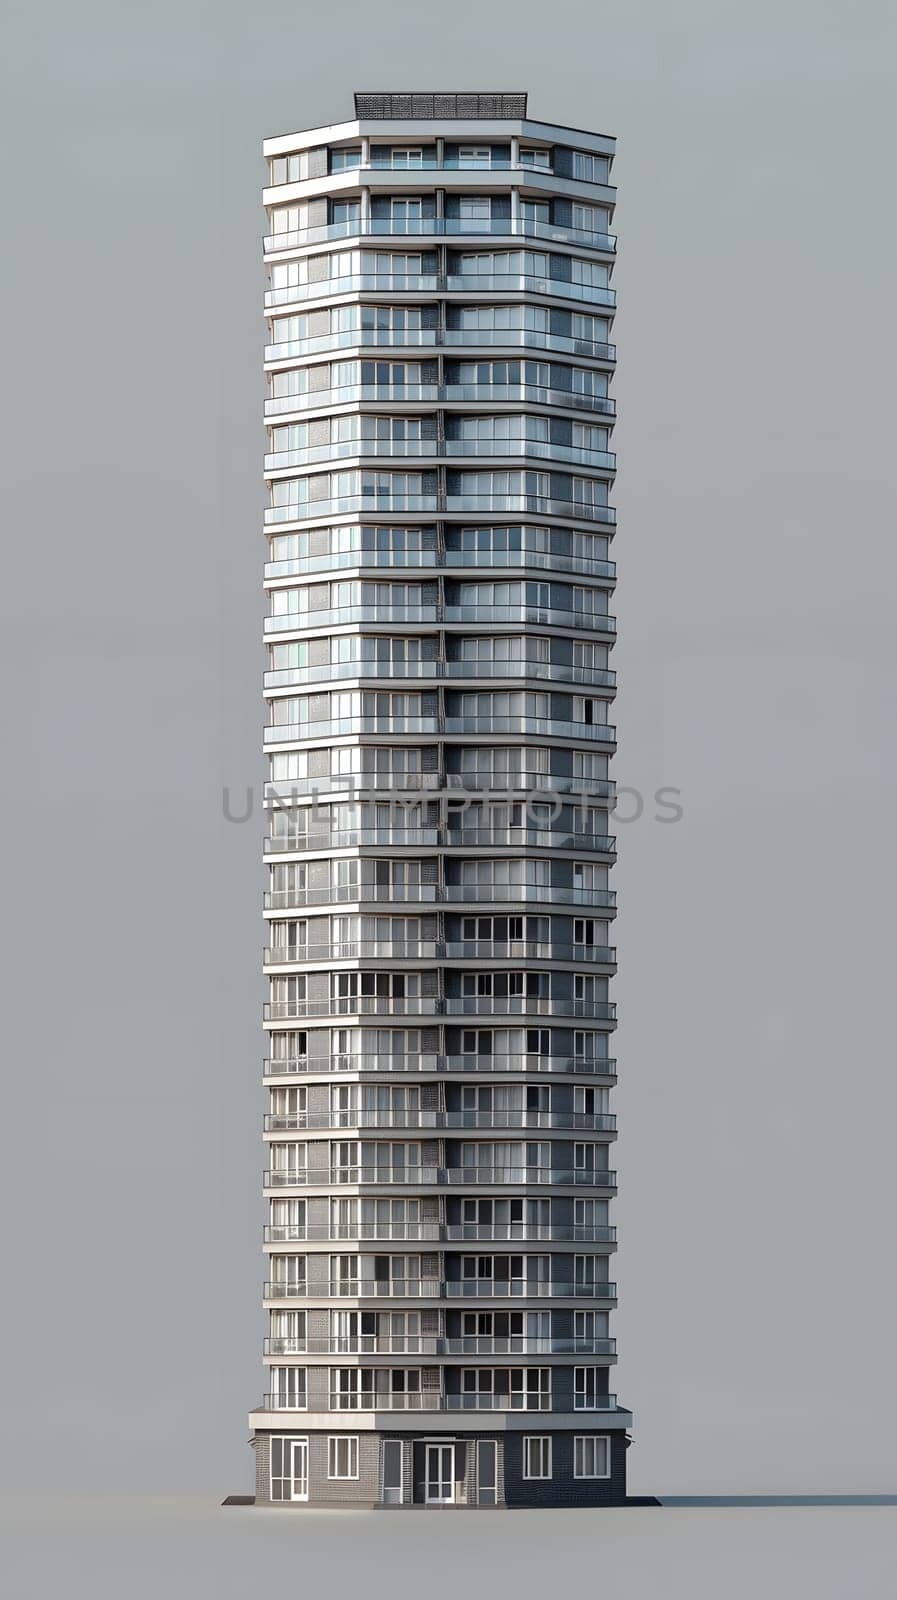 A skyscraper with numerous windows and balconies, resembling a cylindrical tower block. It stands tall in the urban design with a modern condominium vibe